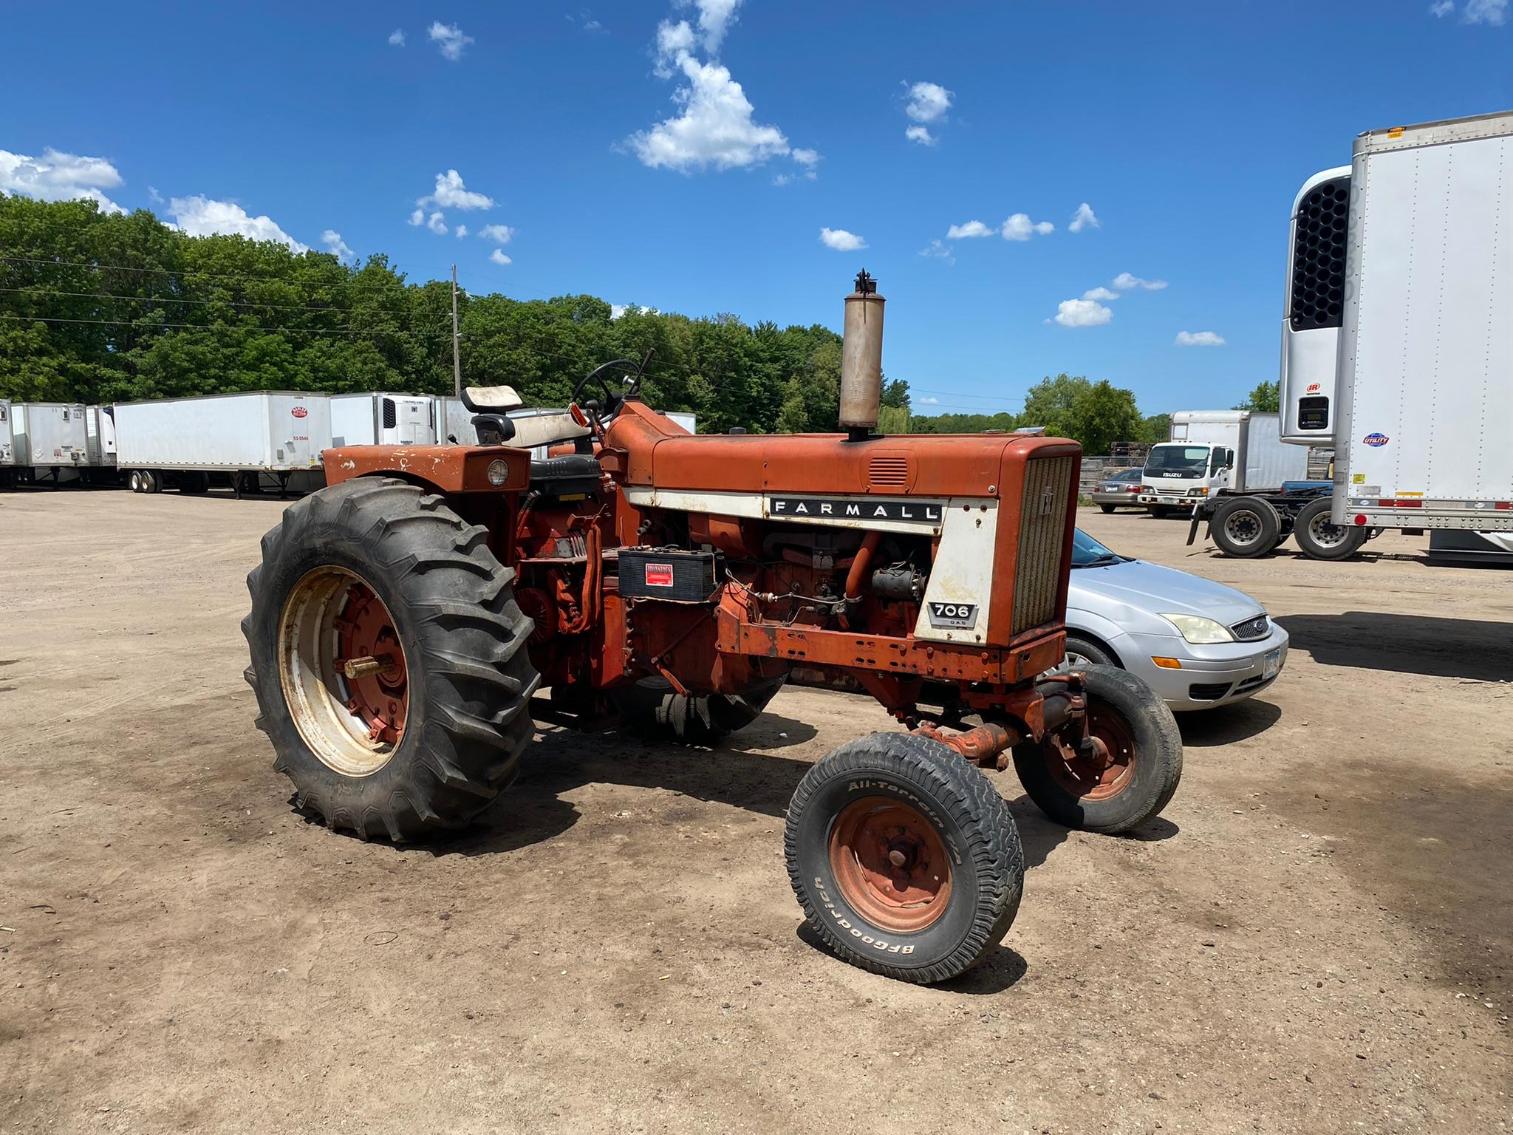 Farmall 706 Gas Tractor, Larson 14' Boat, Air Compressors, Trucking Parts and Accessories